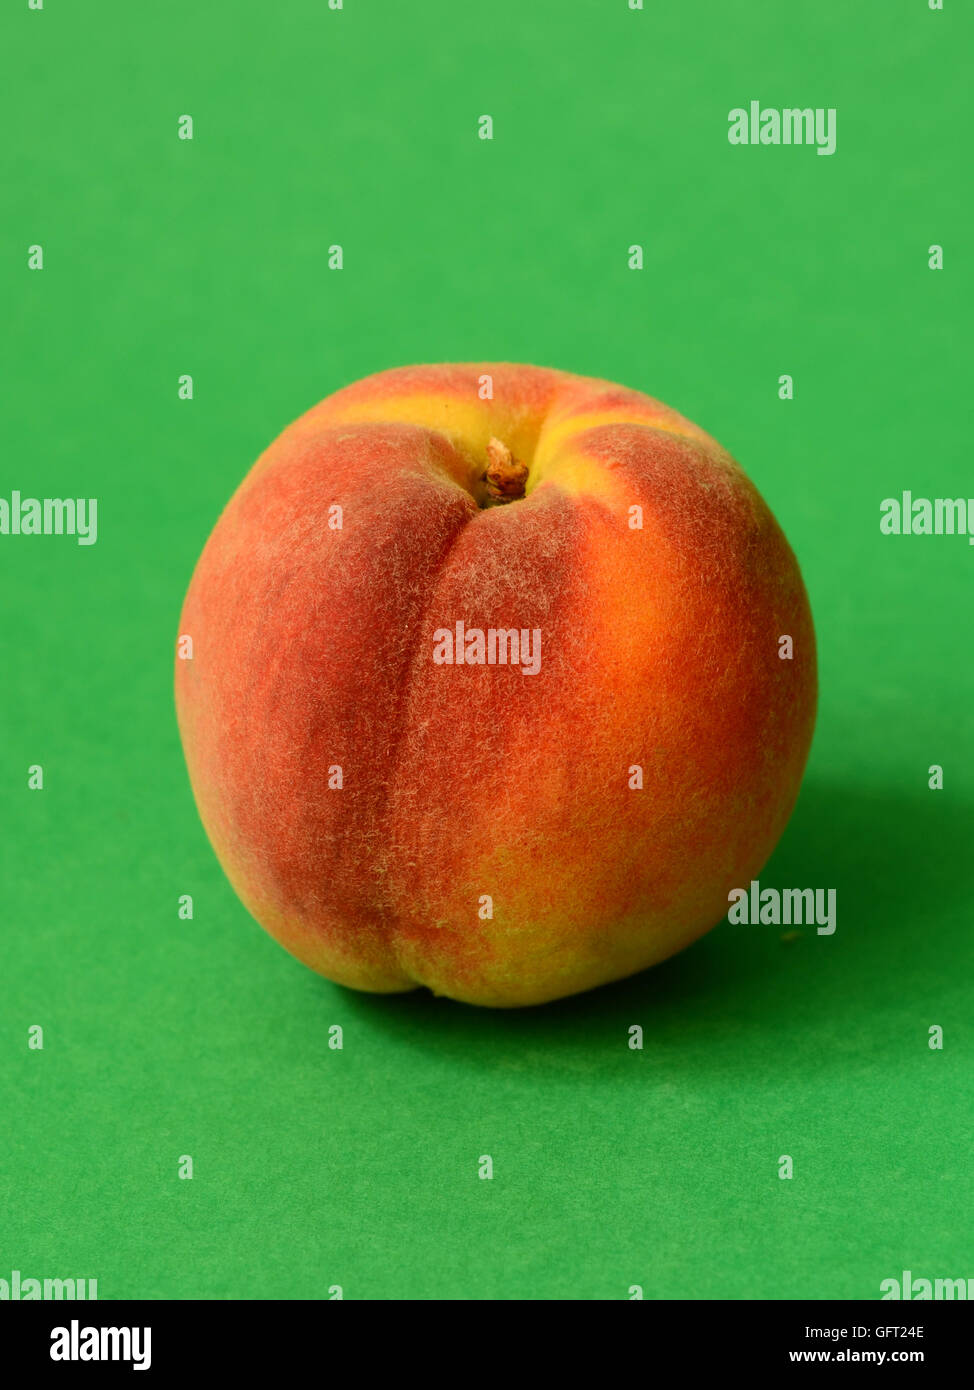 One ripe peach on a green background Stock Photo